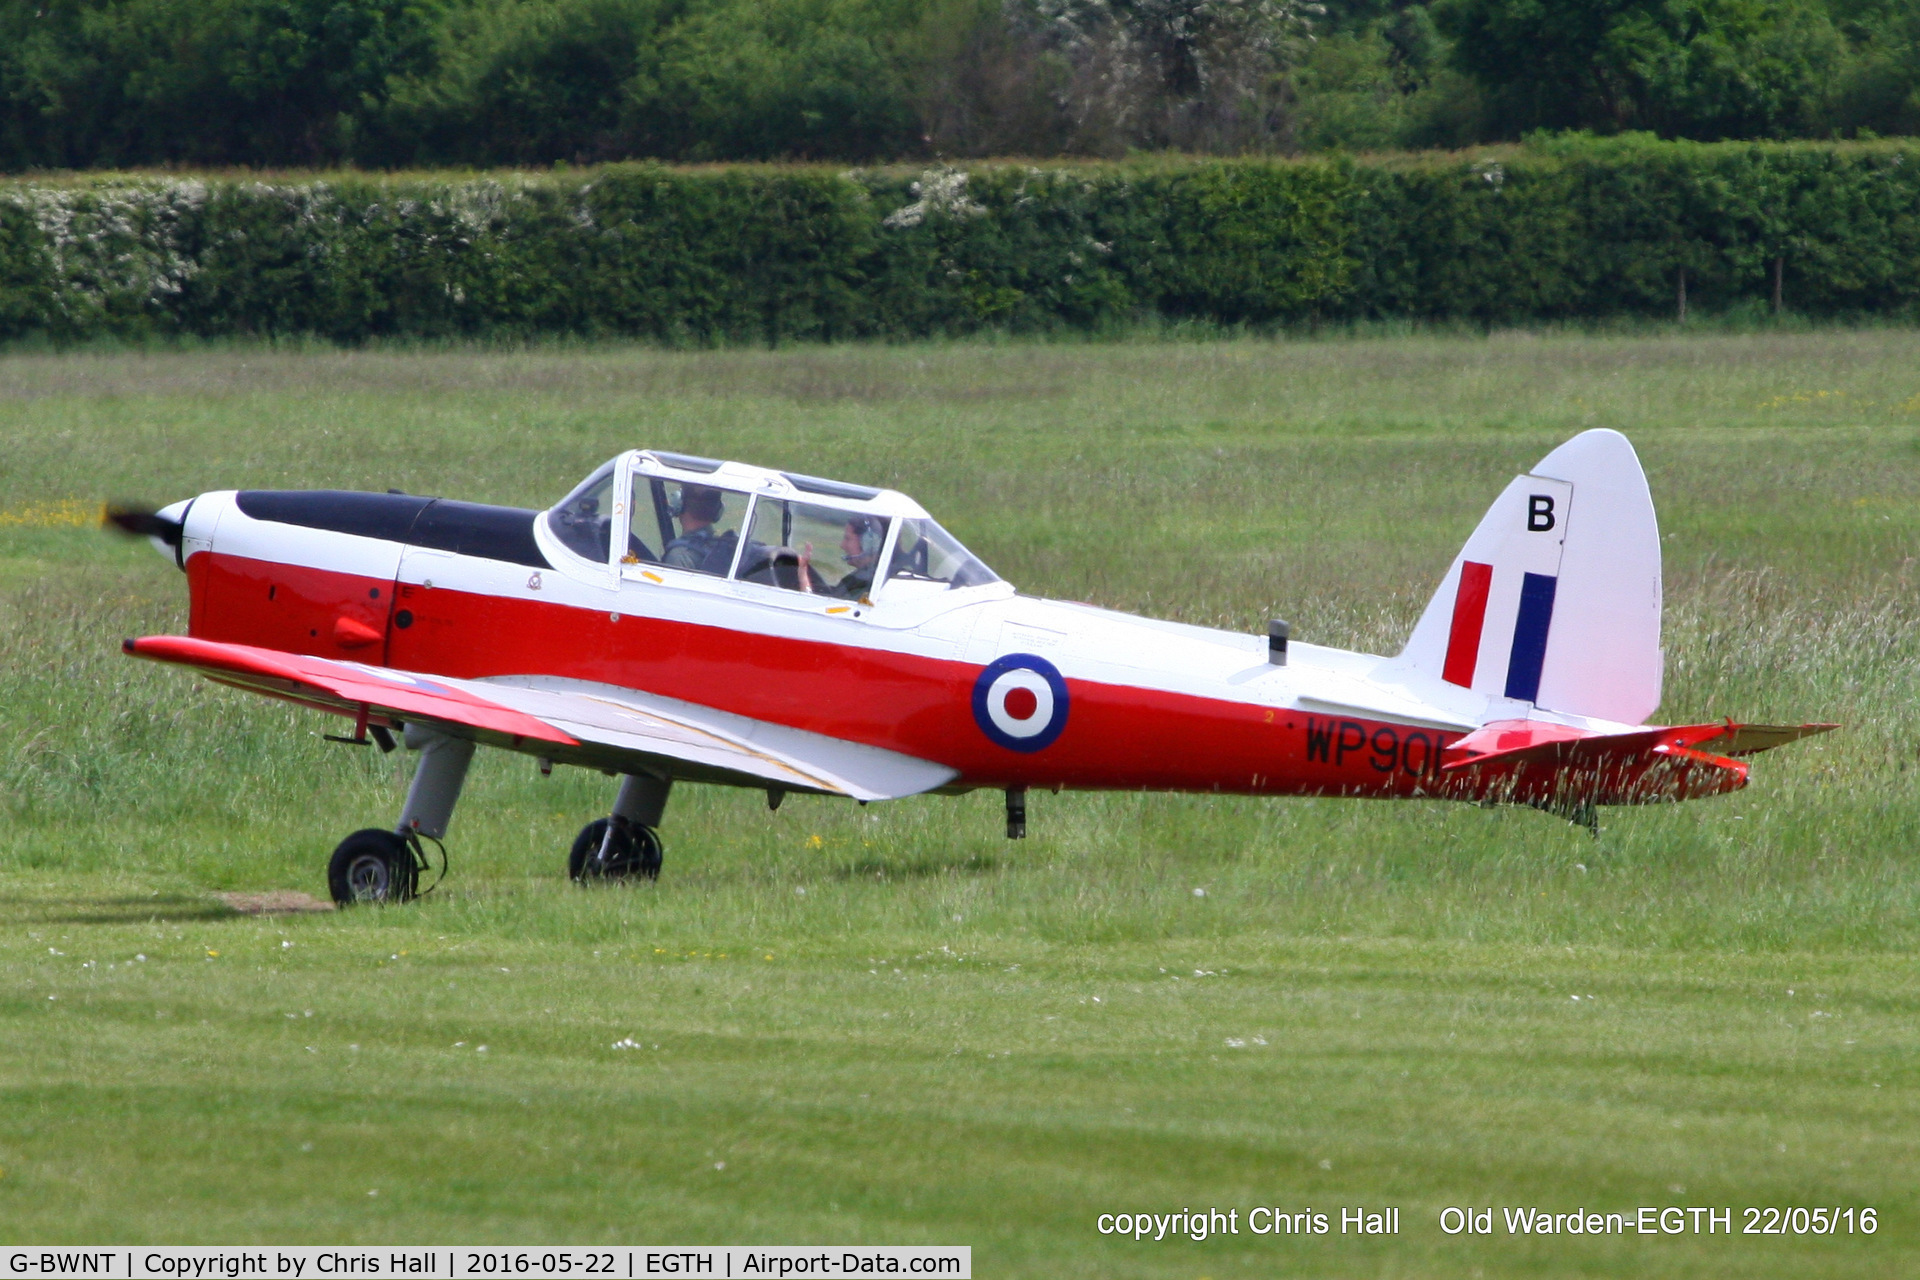 G-BWNT, 1952 De Havilland DHC-1 Chipmunk T.10 C/N C1/0772, 70th Anniversary of the first flight of the de Havilland Chipmunk  Fly-In at Old Warden